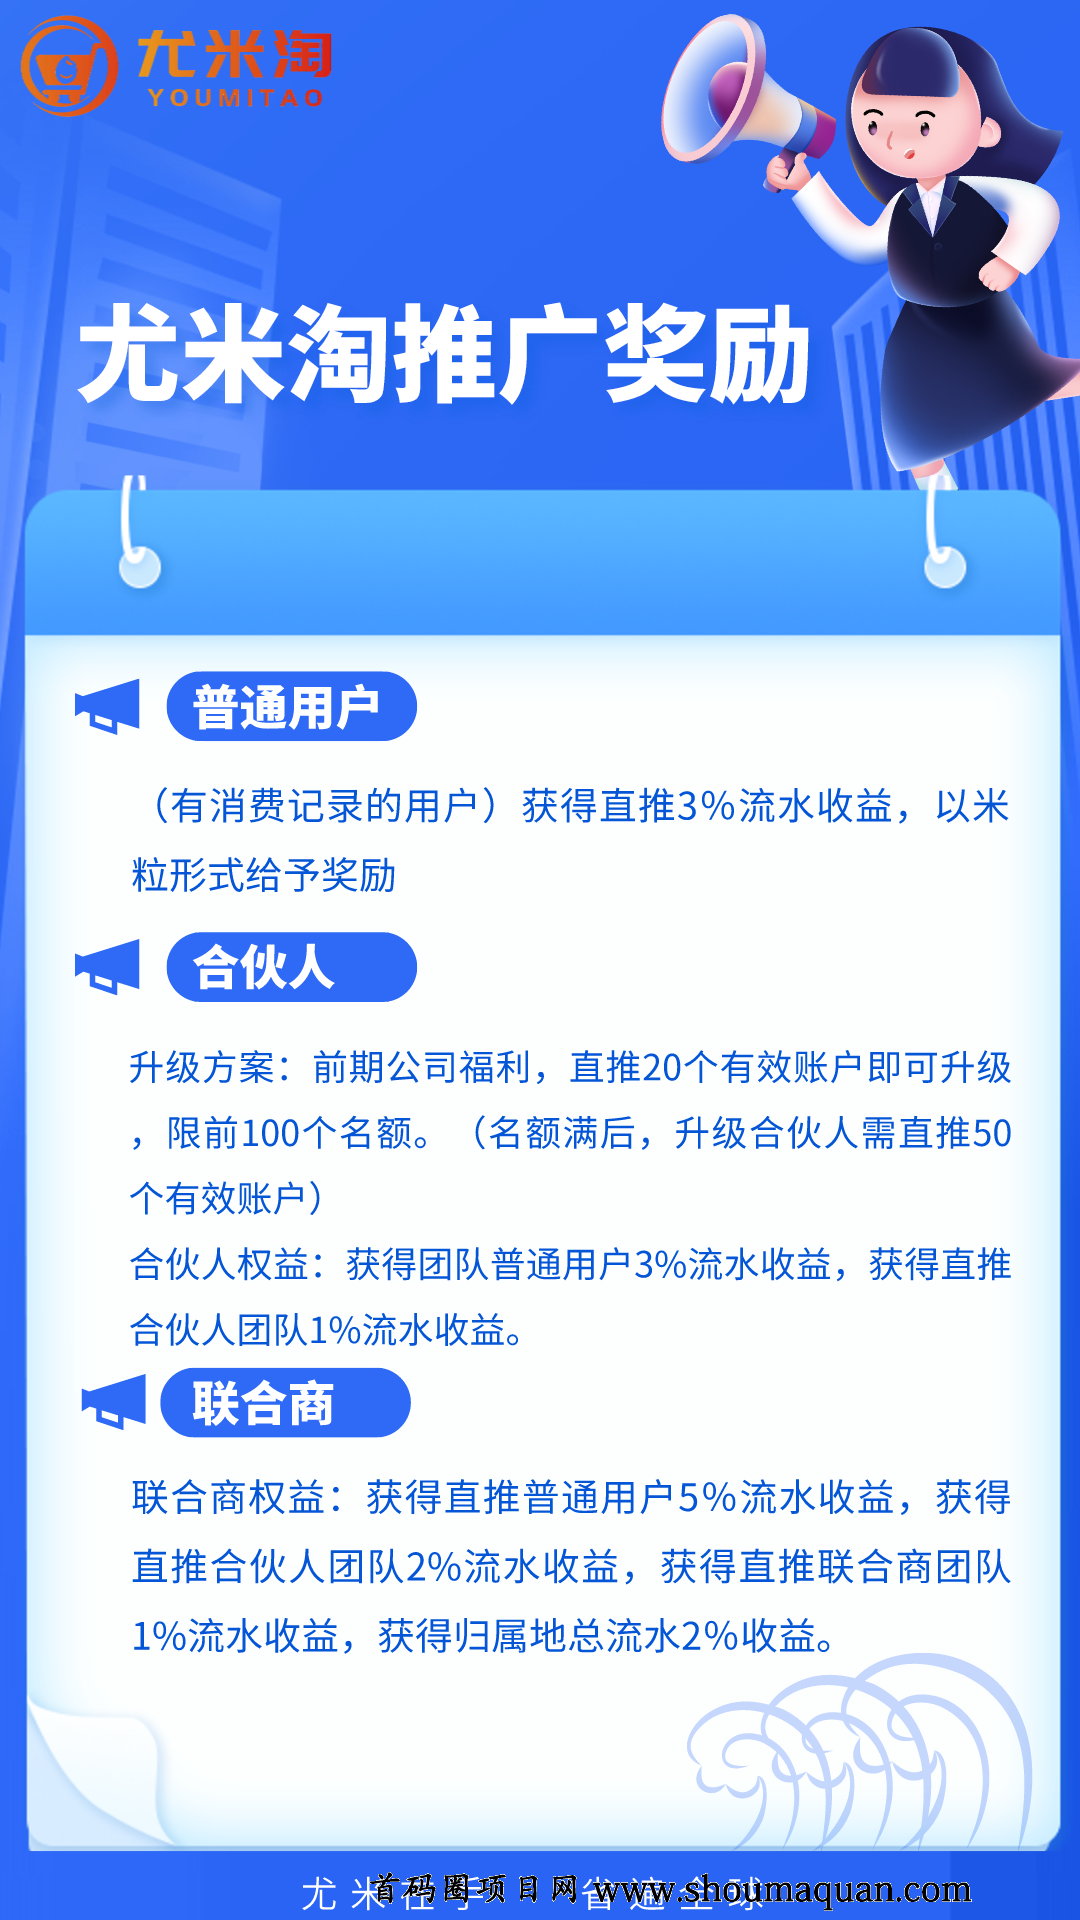 V信图片_20210830231702.png